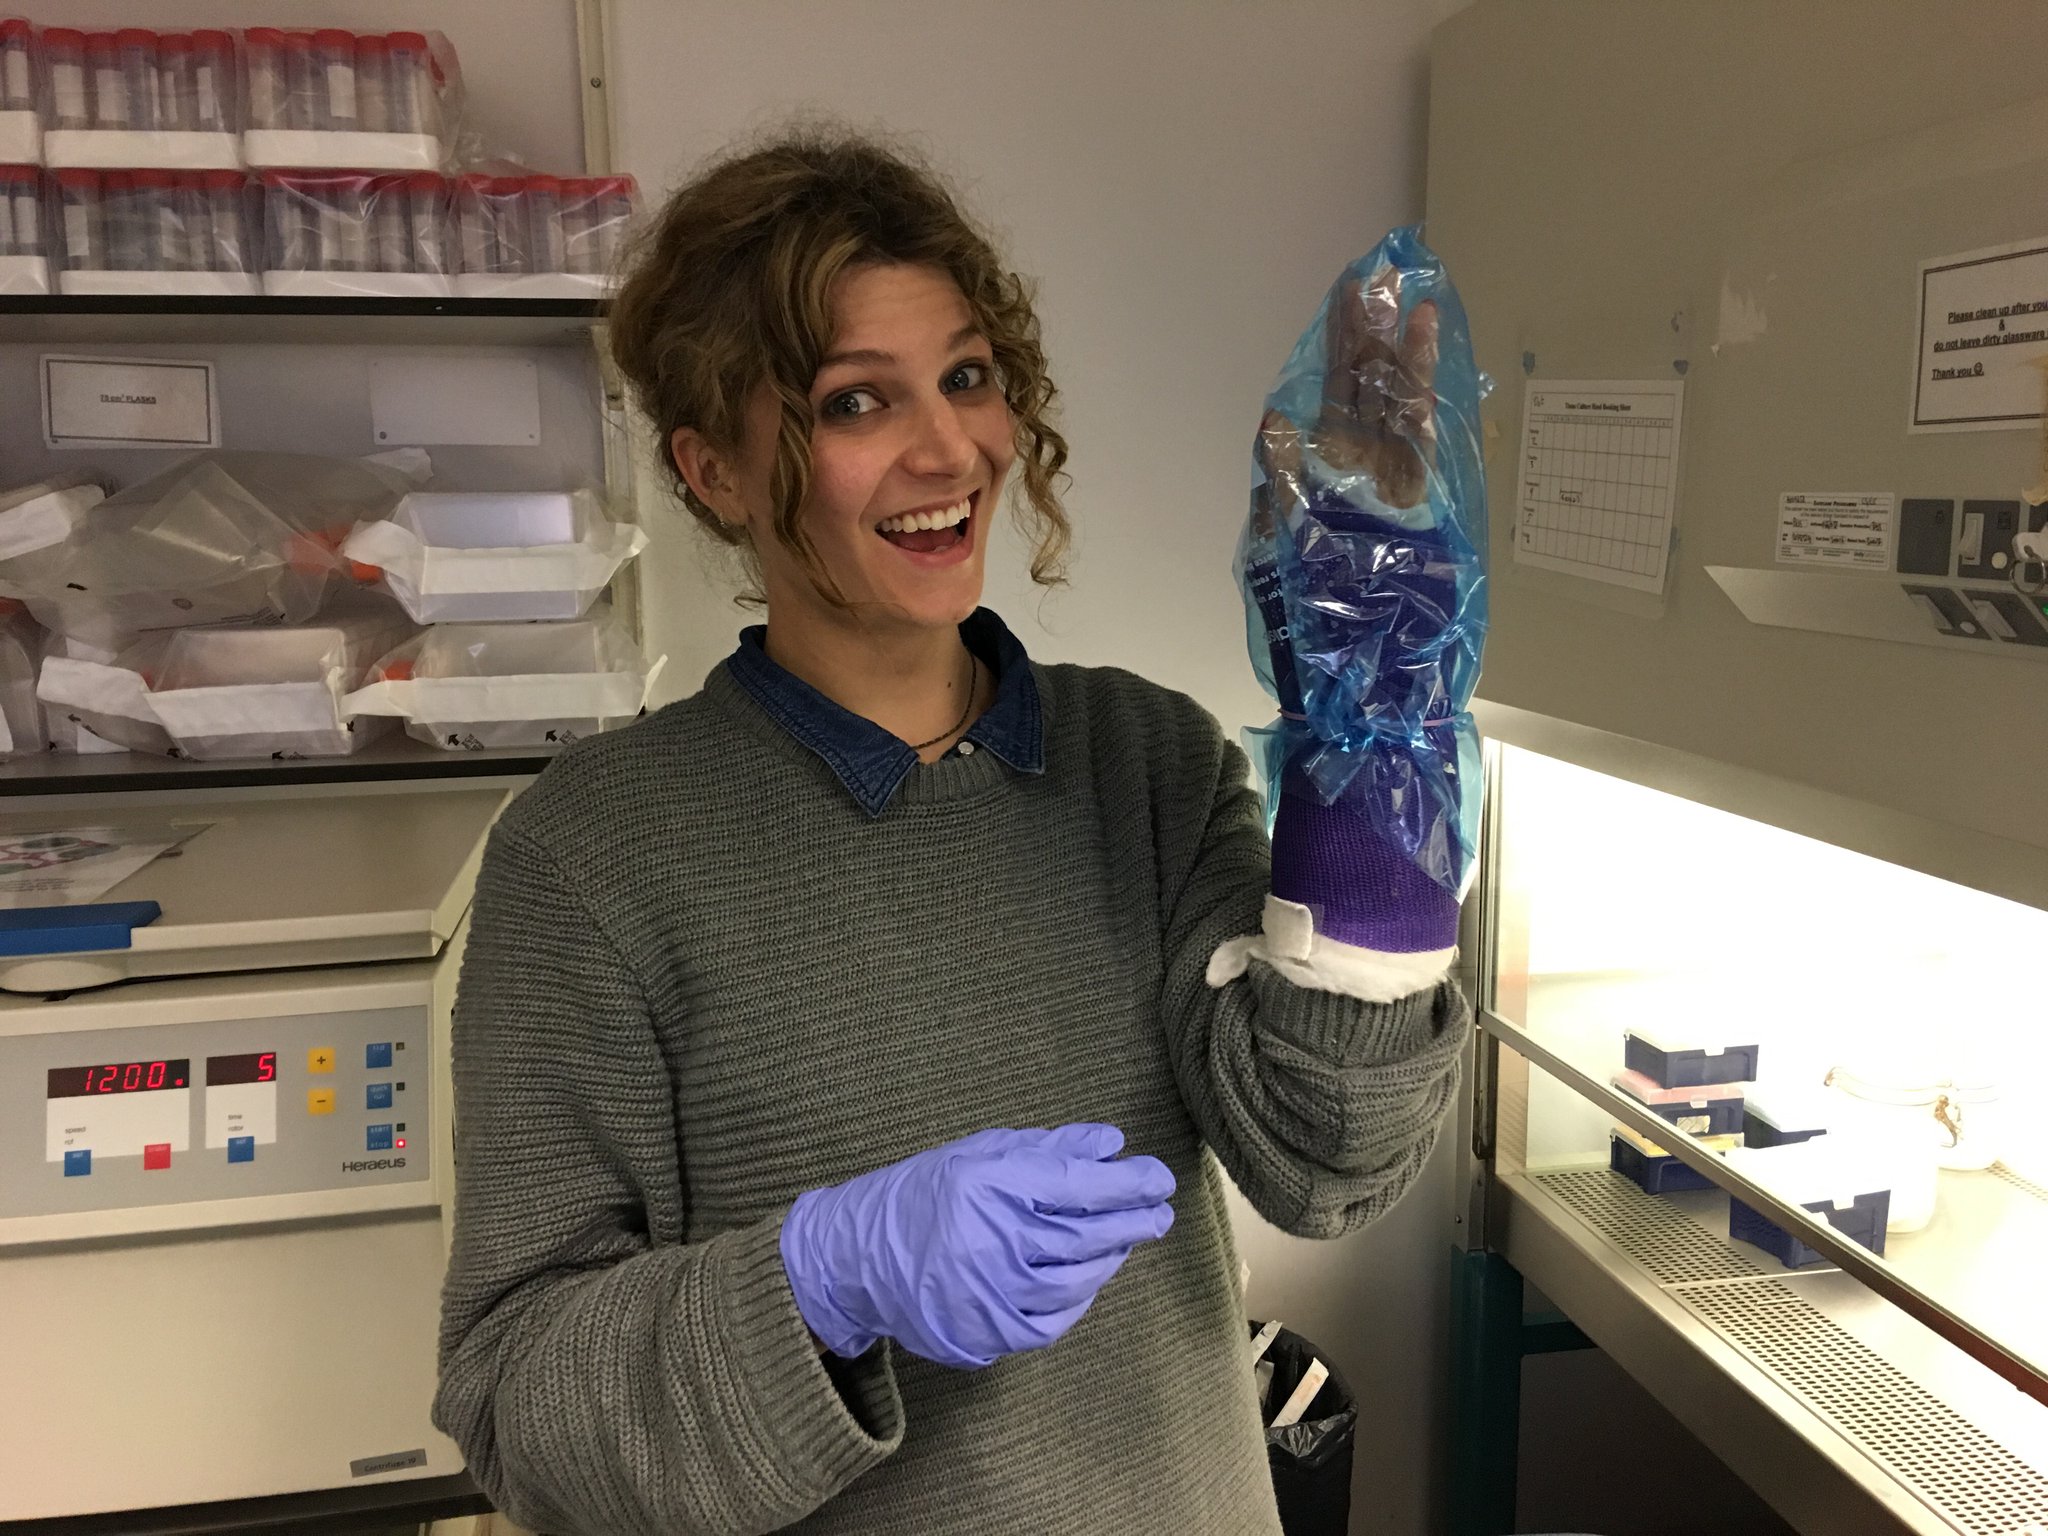 #Cancer immunology researcher Louise's vital lab work doesn't stop.... even with a broken wrist!!! #AdaLovelaceDay #ALD17 https://t.co/TGyiUNbokC